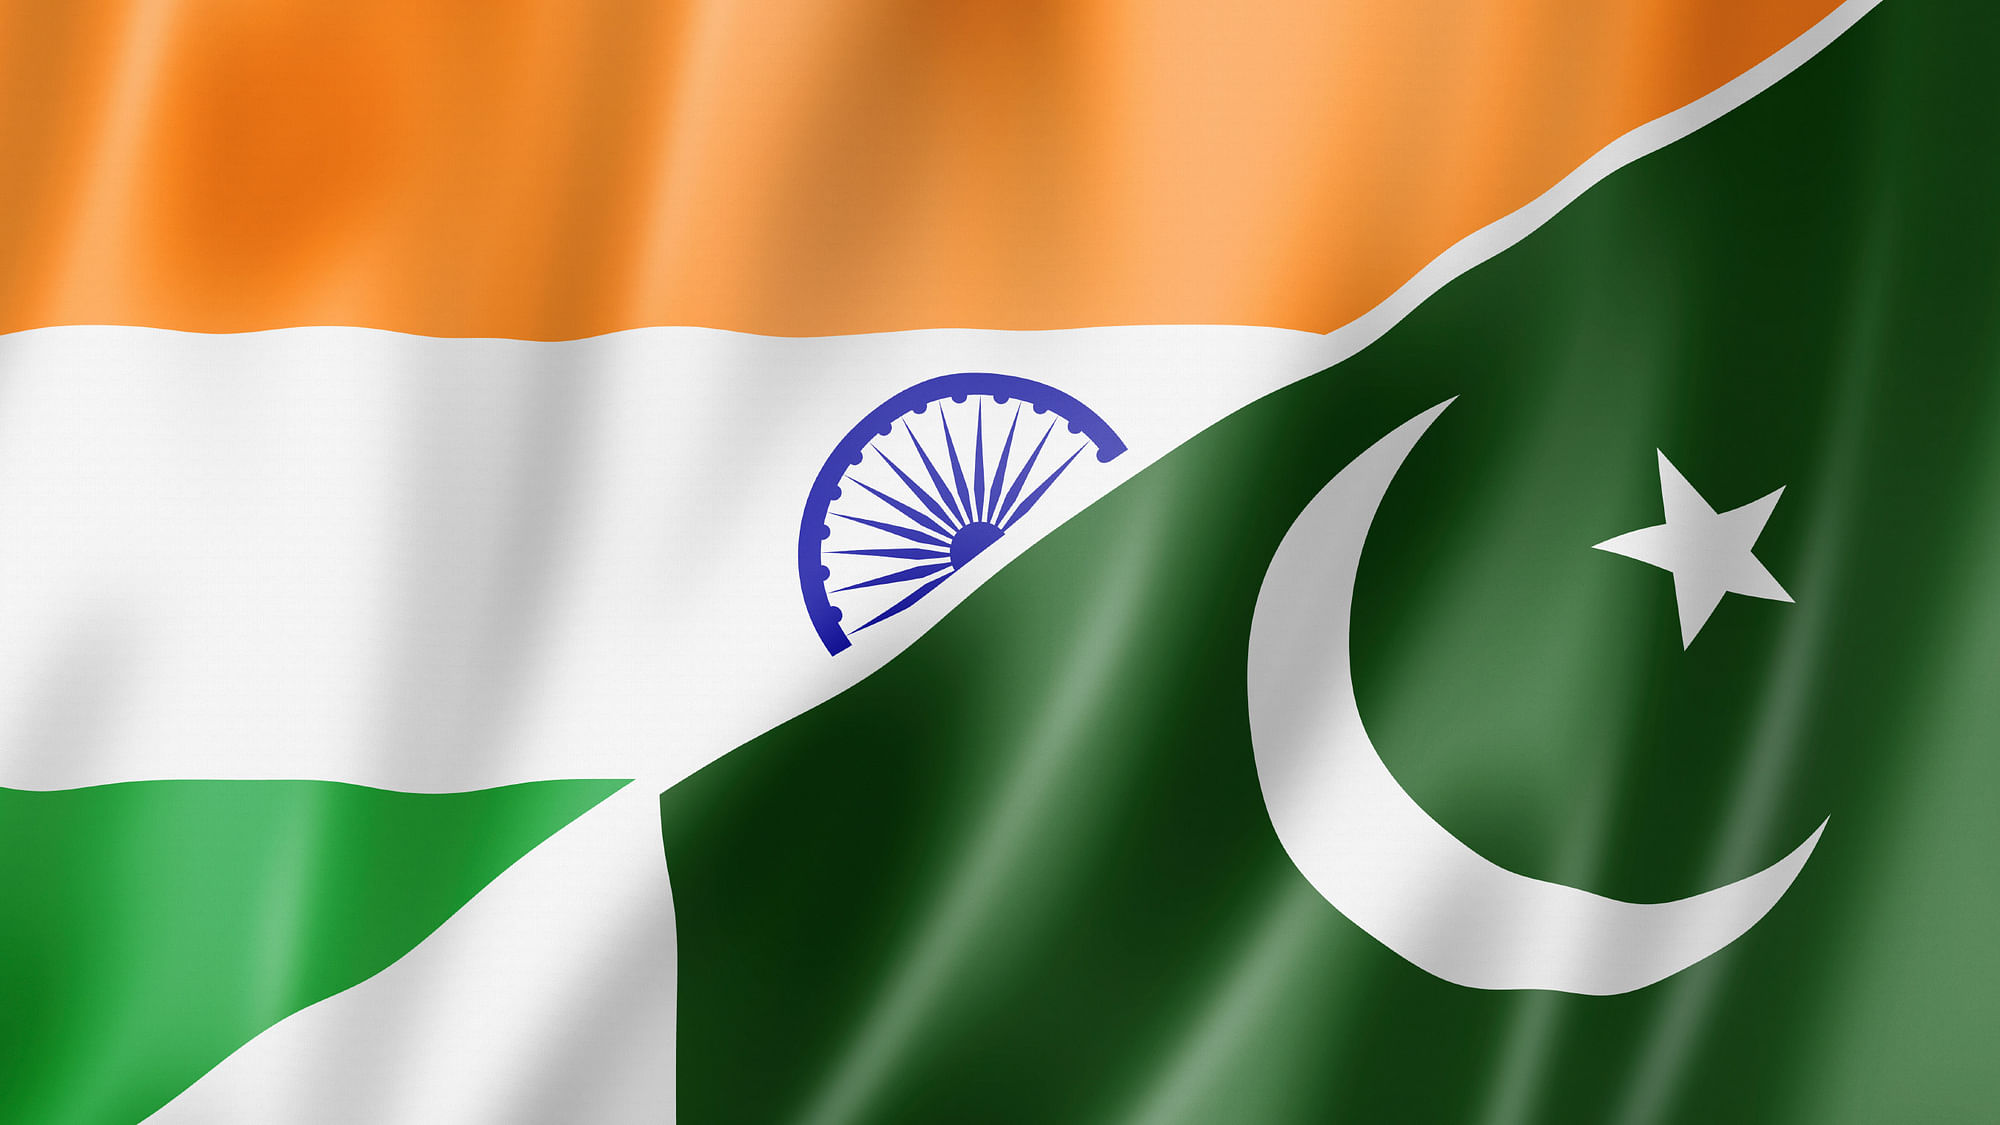 MEA stated that they have urged Pakistan to investigate the matter.